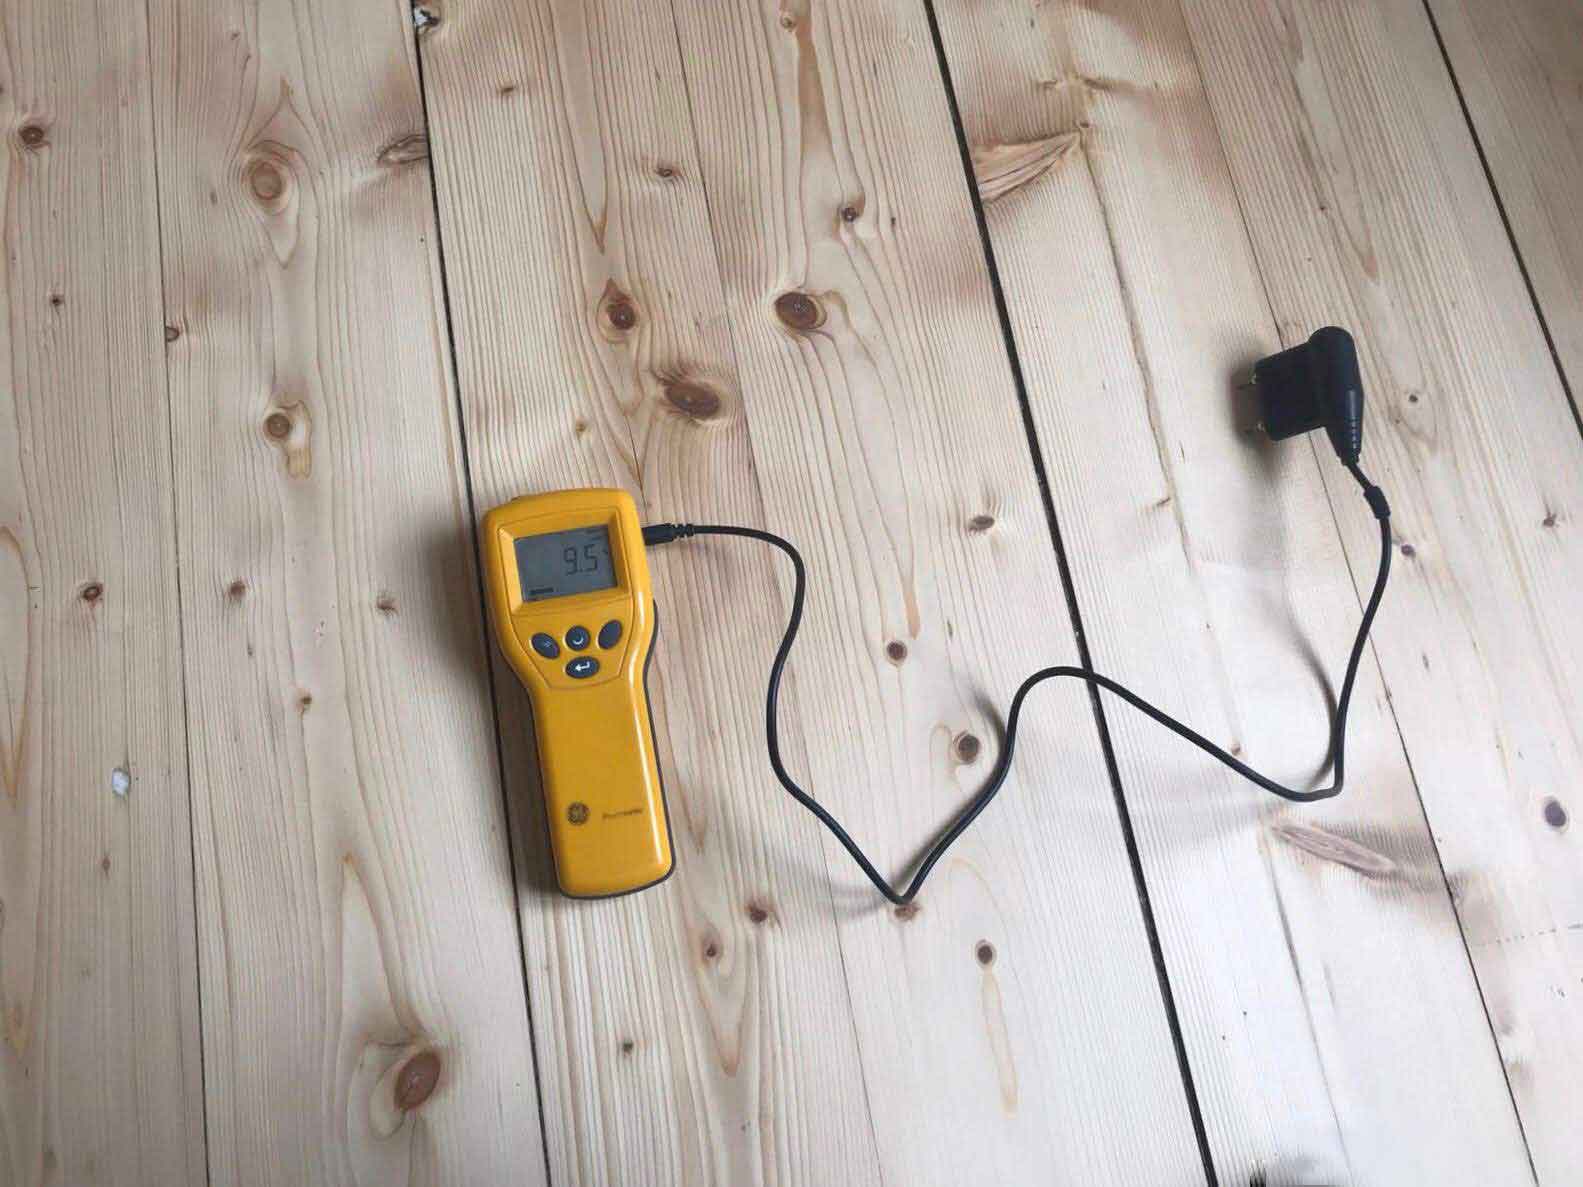 Humidity readings and moisture readings of pine wooden floor